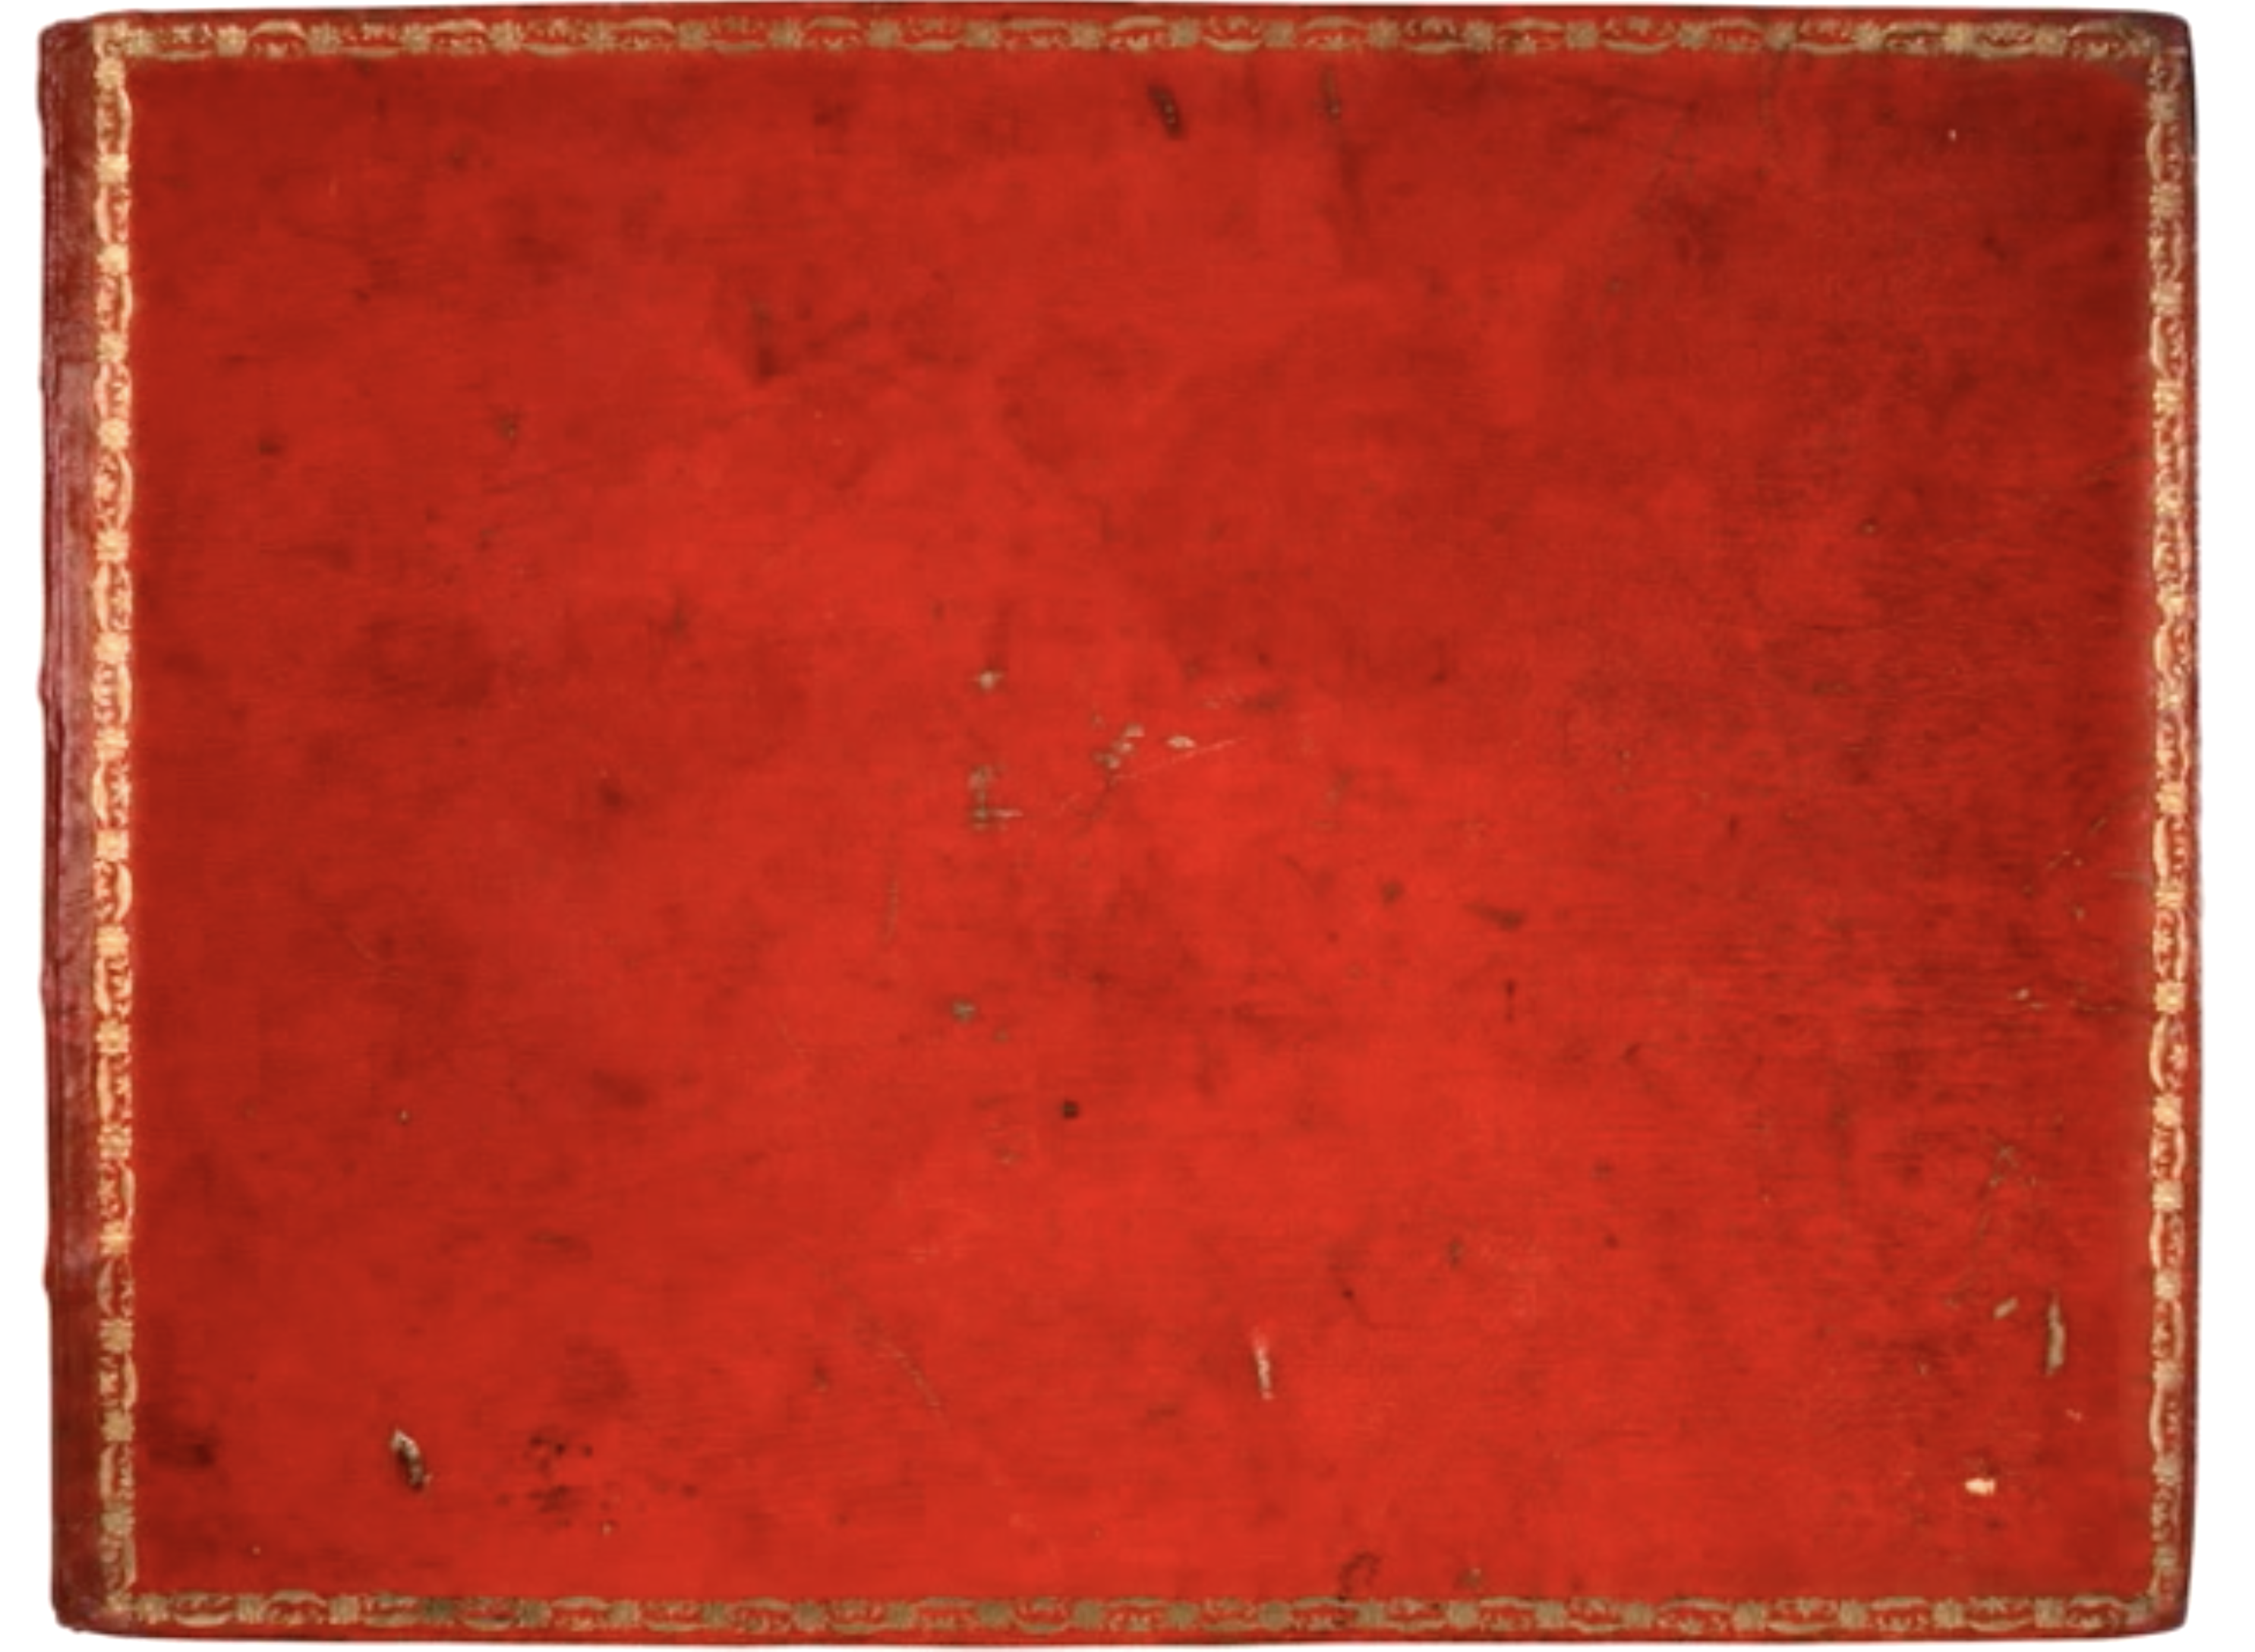 A Humphry Repton Red Book